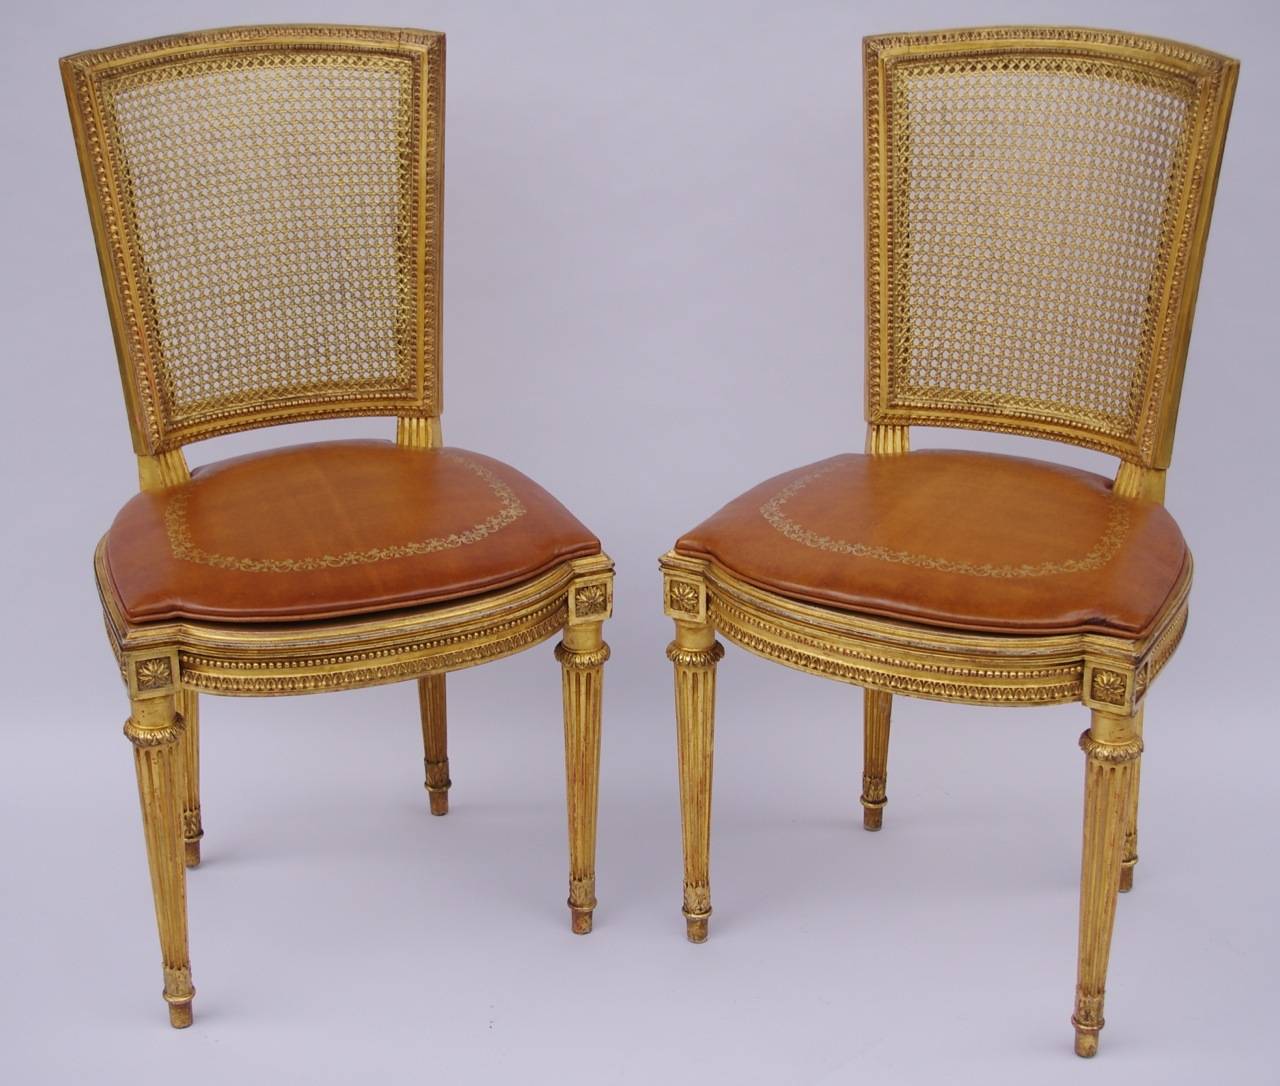 Late 19th Century Pair of Louis XVI Style Gilt Carved Cane Armchairs, circa 1880